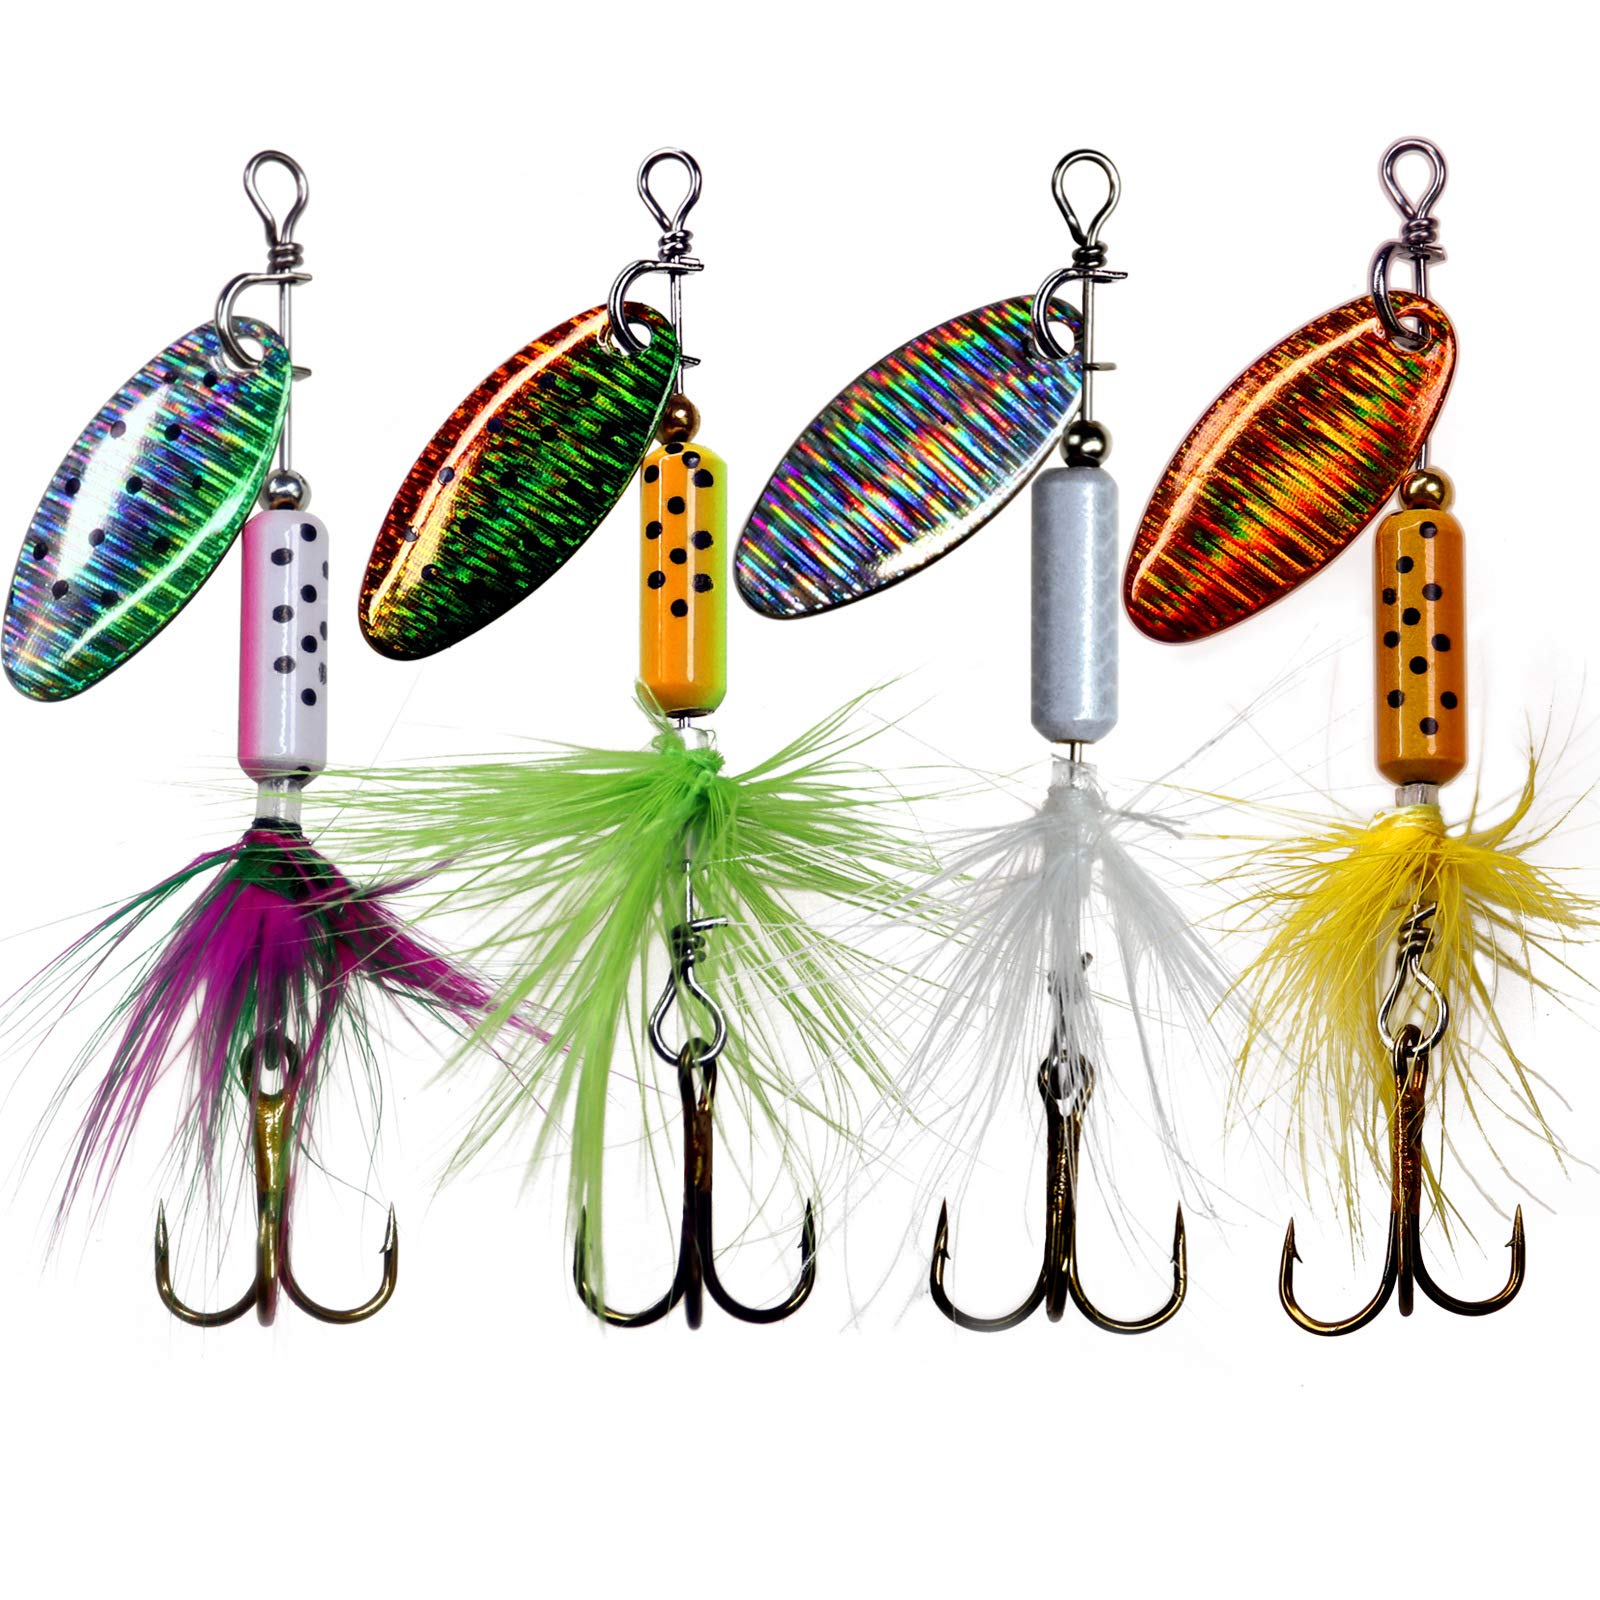  Fishing Lures Trout Lures Fishing Spoons Lures For